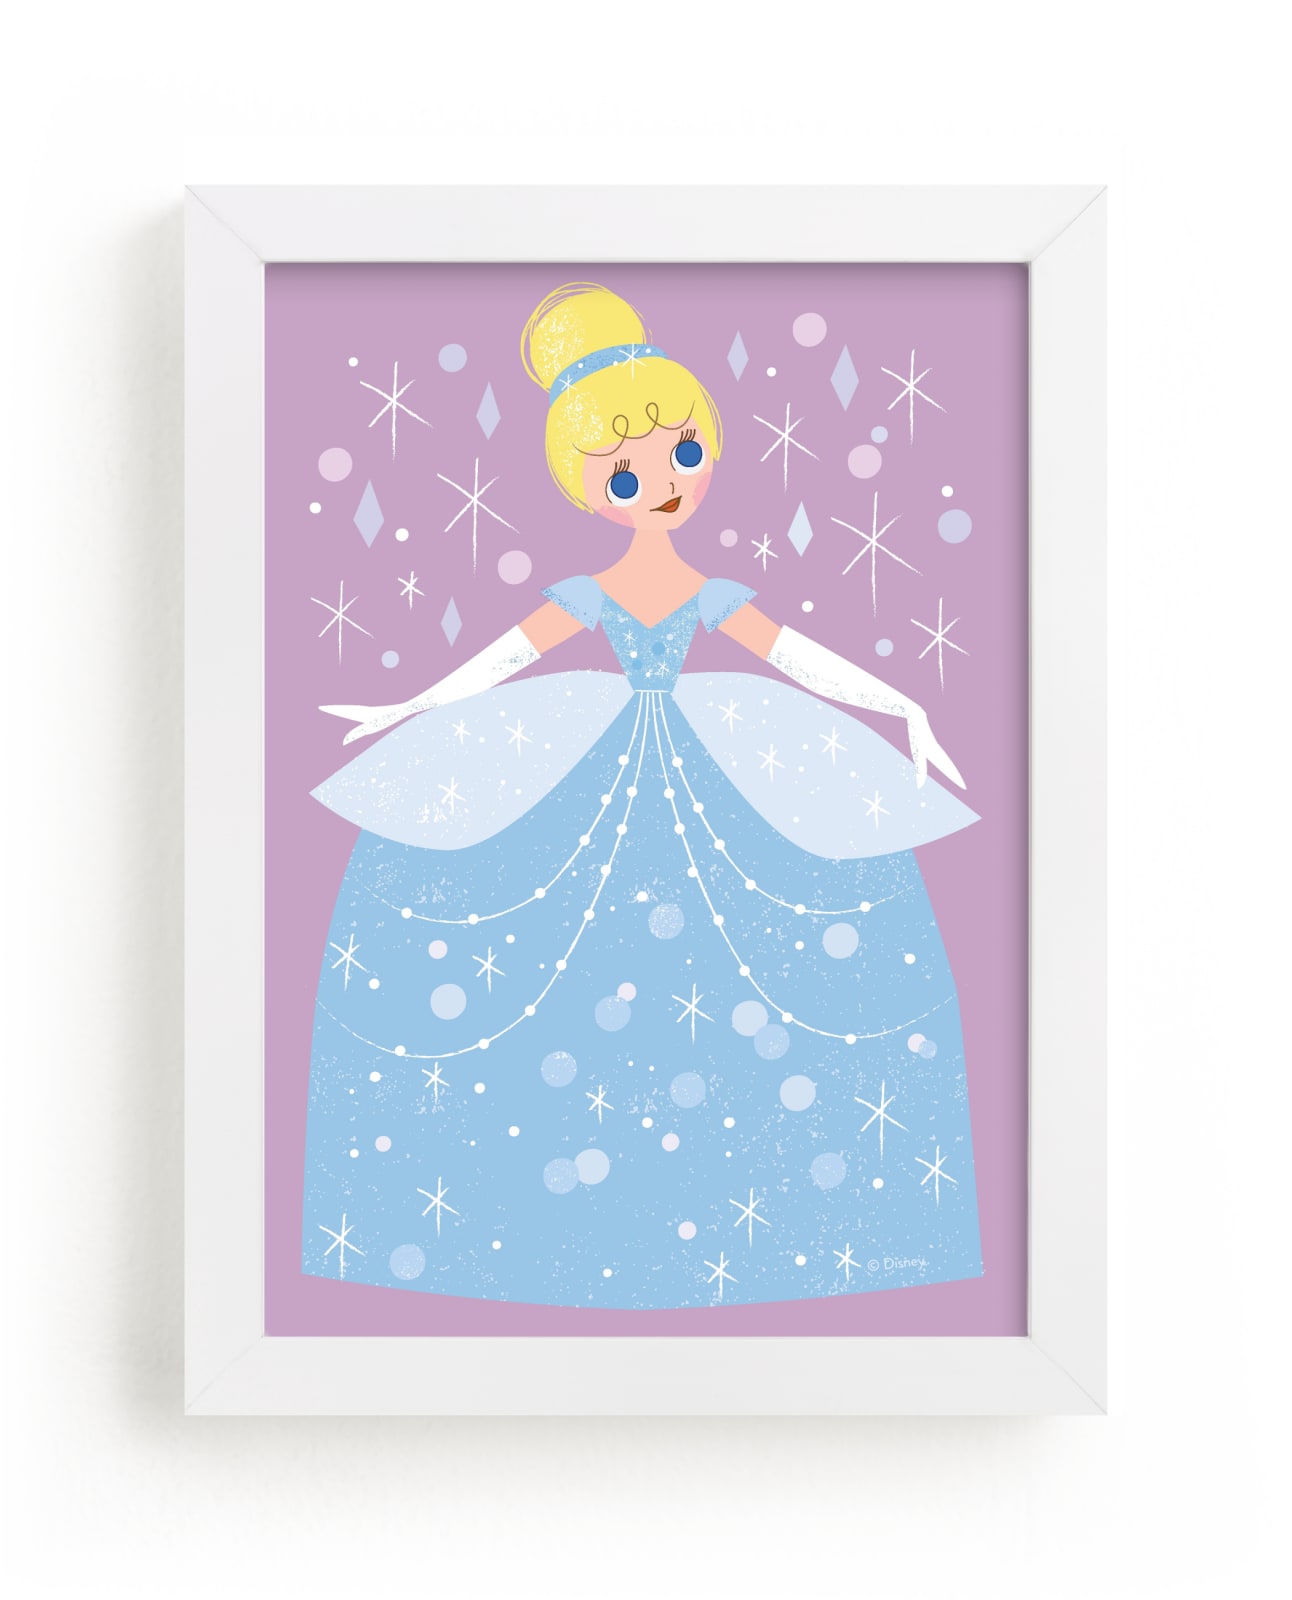 This is a blue disney art by Angela Thompson called Sparkling Cinderella.